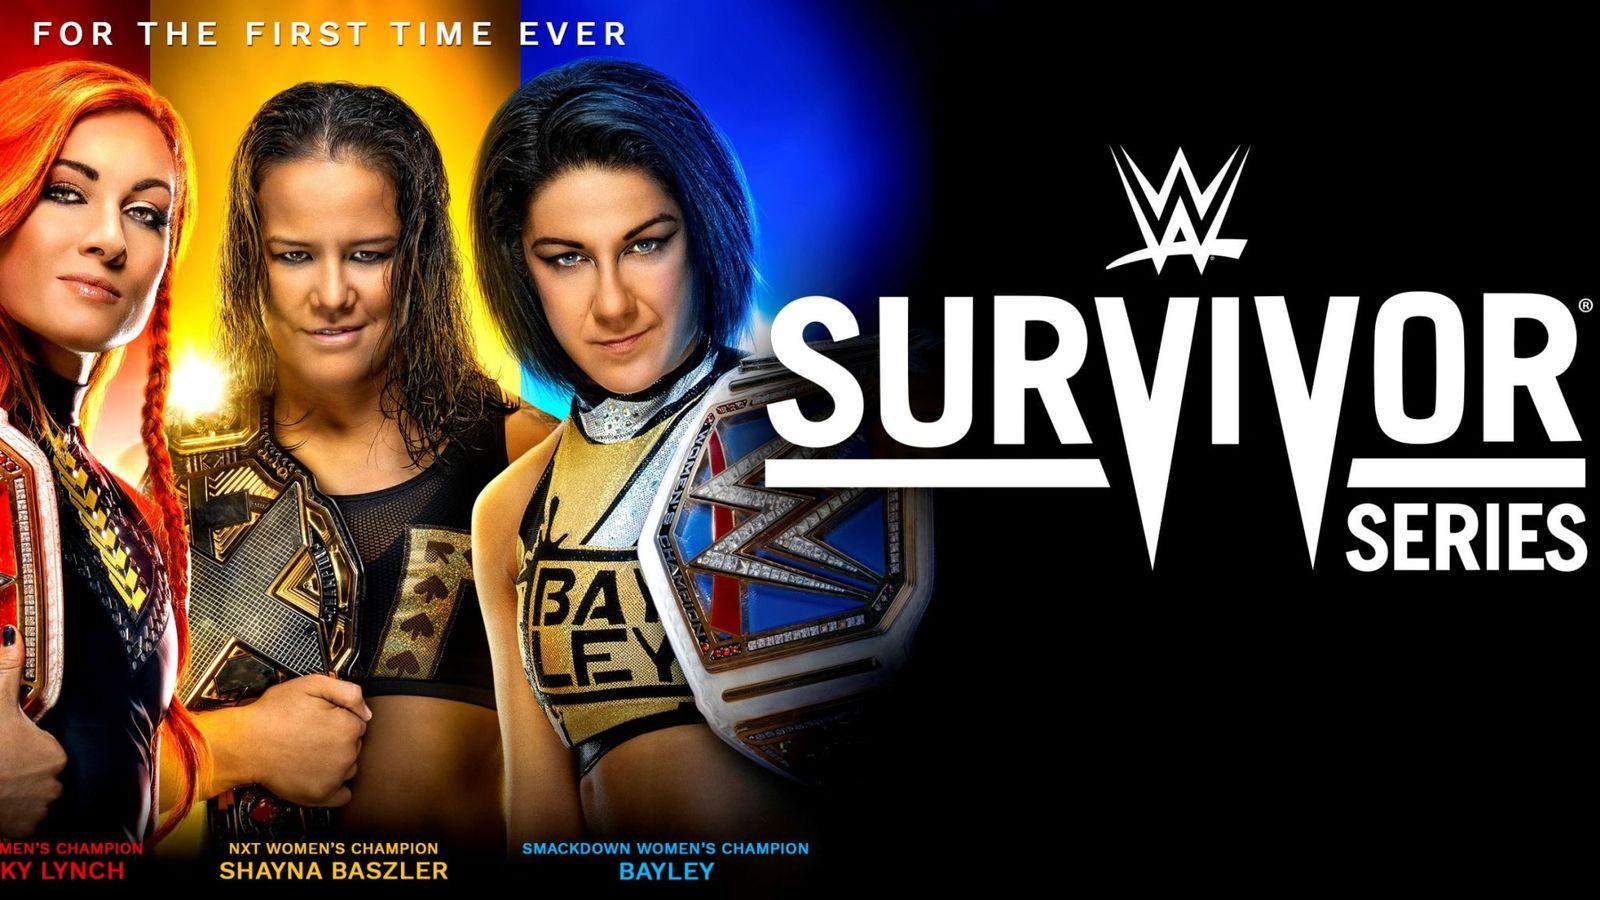 How to order WWE Survivor Series with Sky Sports Box Office